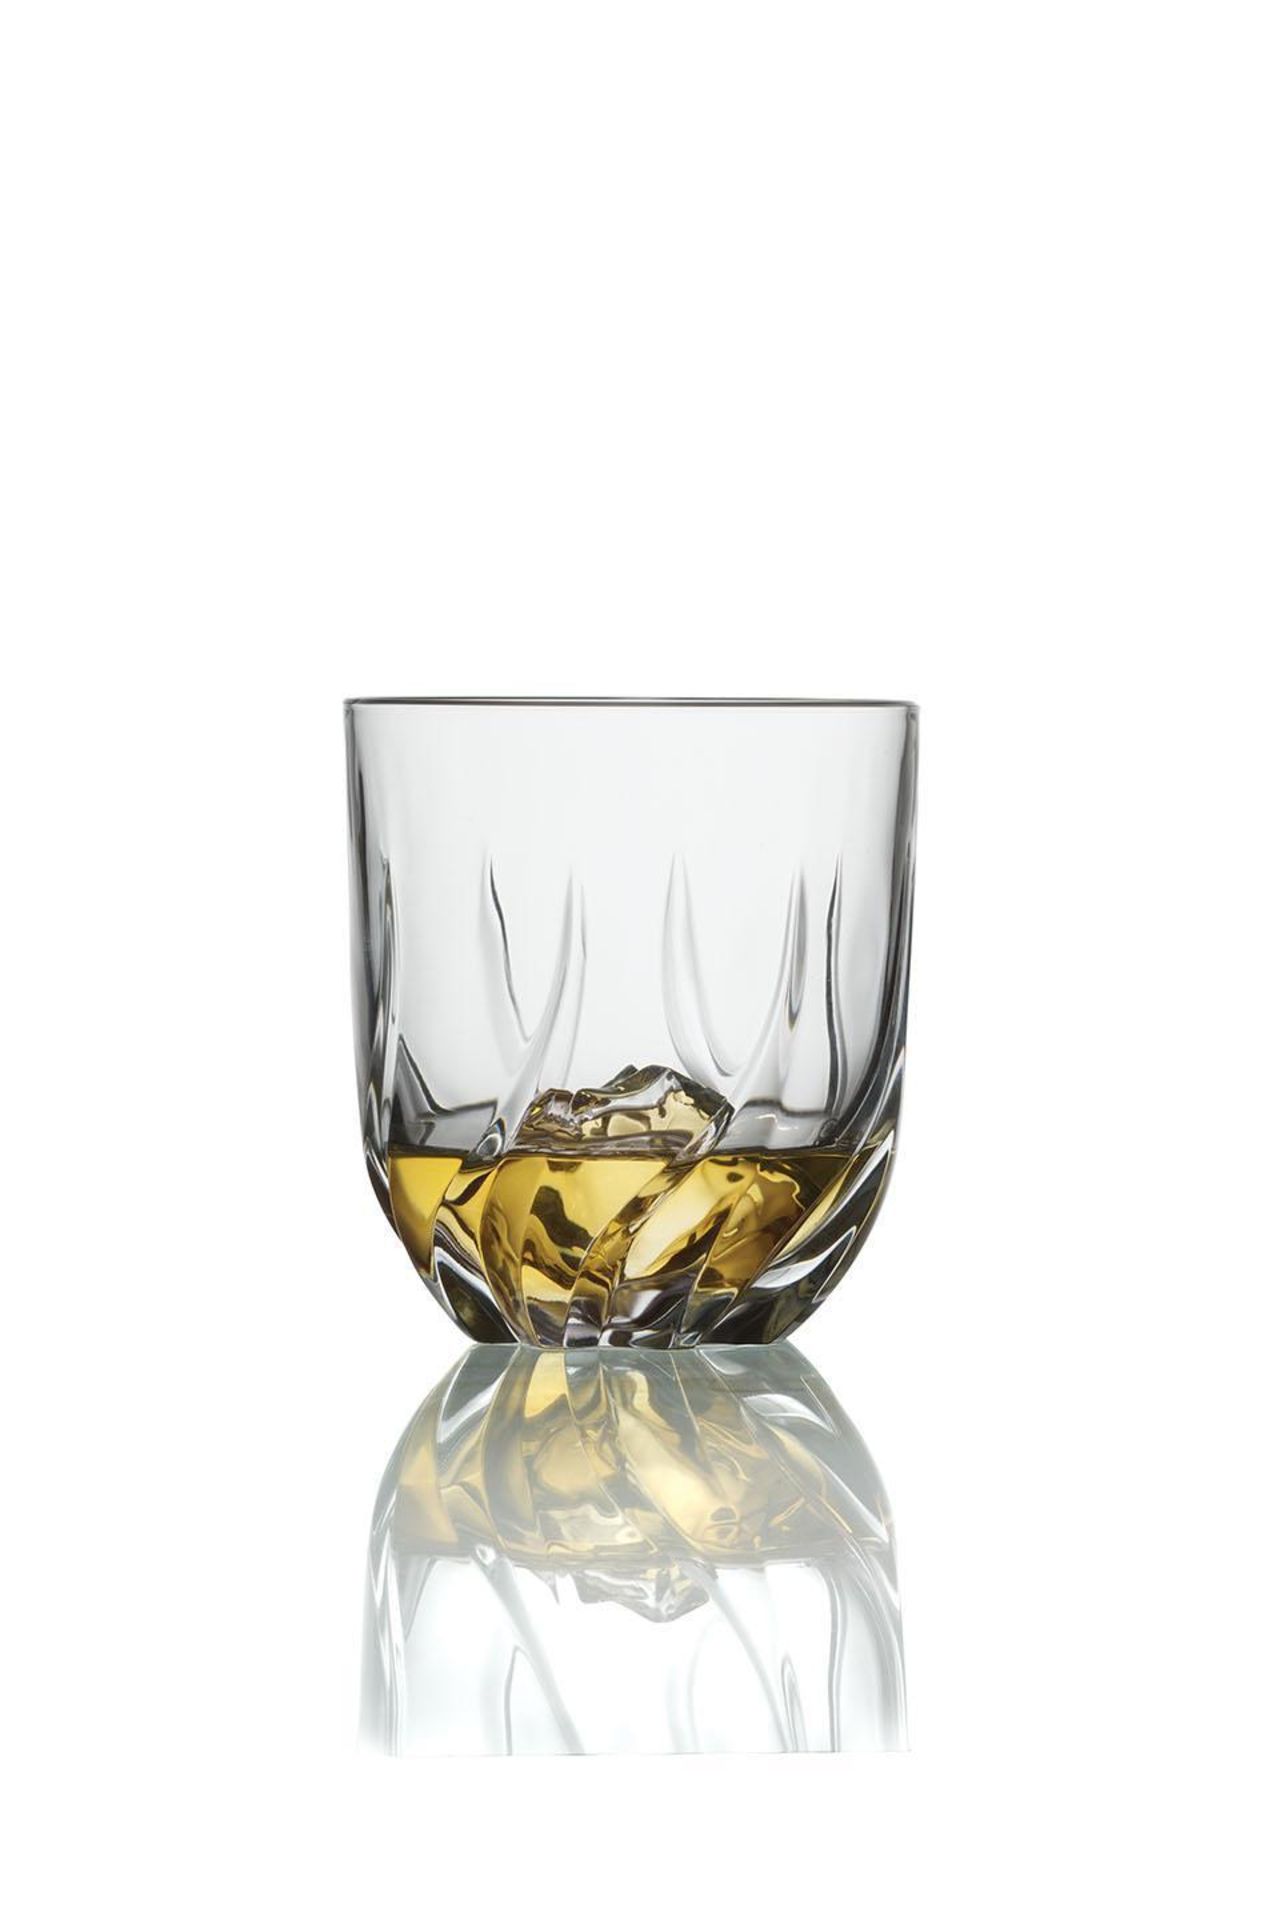 V Brand New RCR Twist Whiskey Glasses 33cl - Made In Italy X 2 YOUR BID PRICE TO BE MULTIPLIED BY